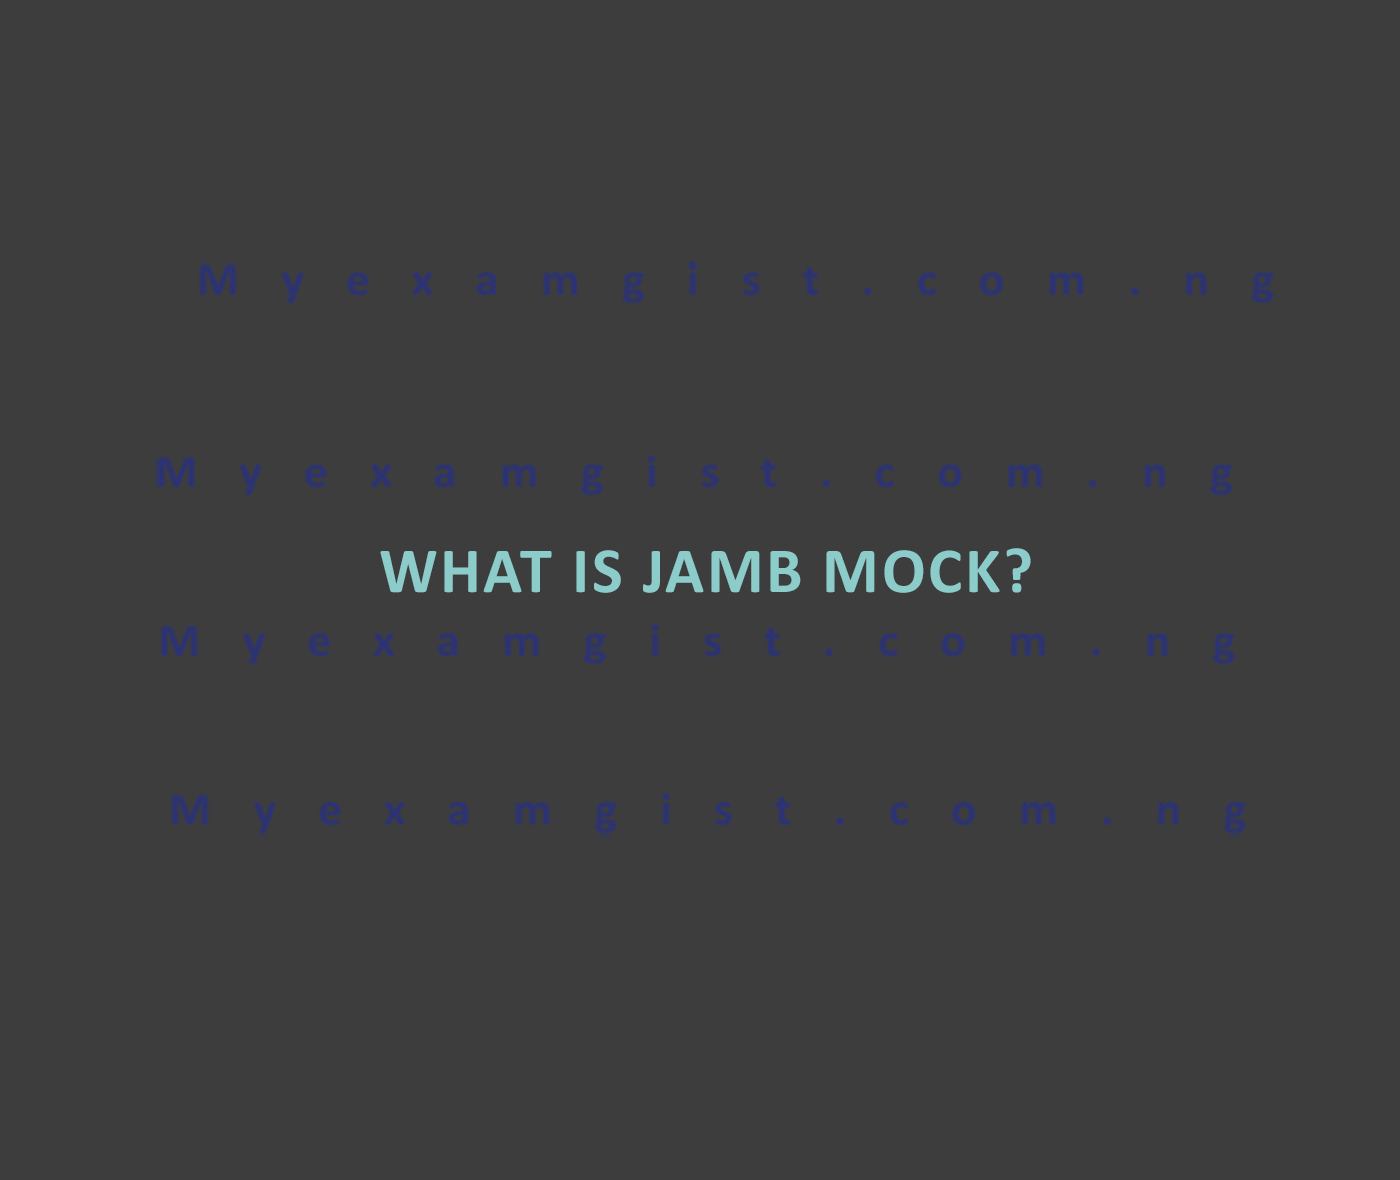 What is JAMB mock?